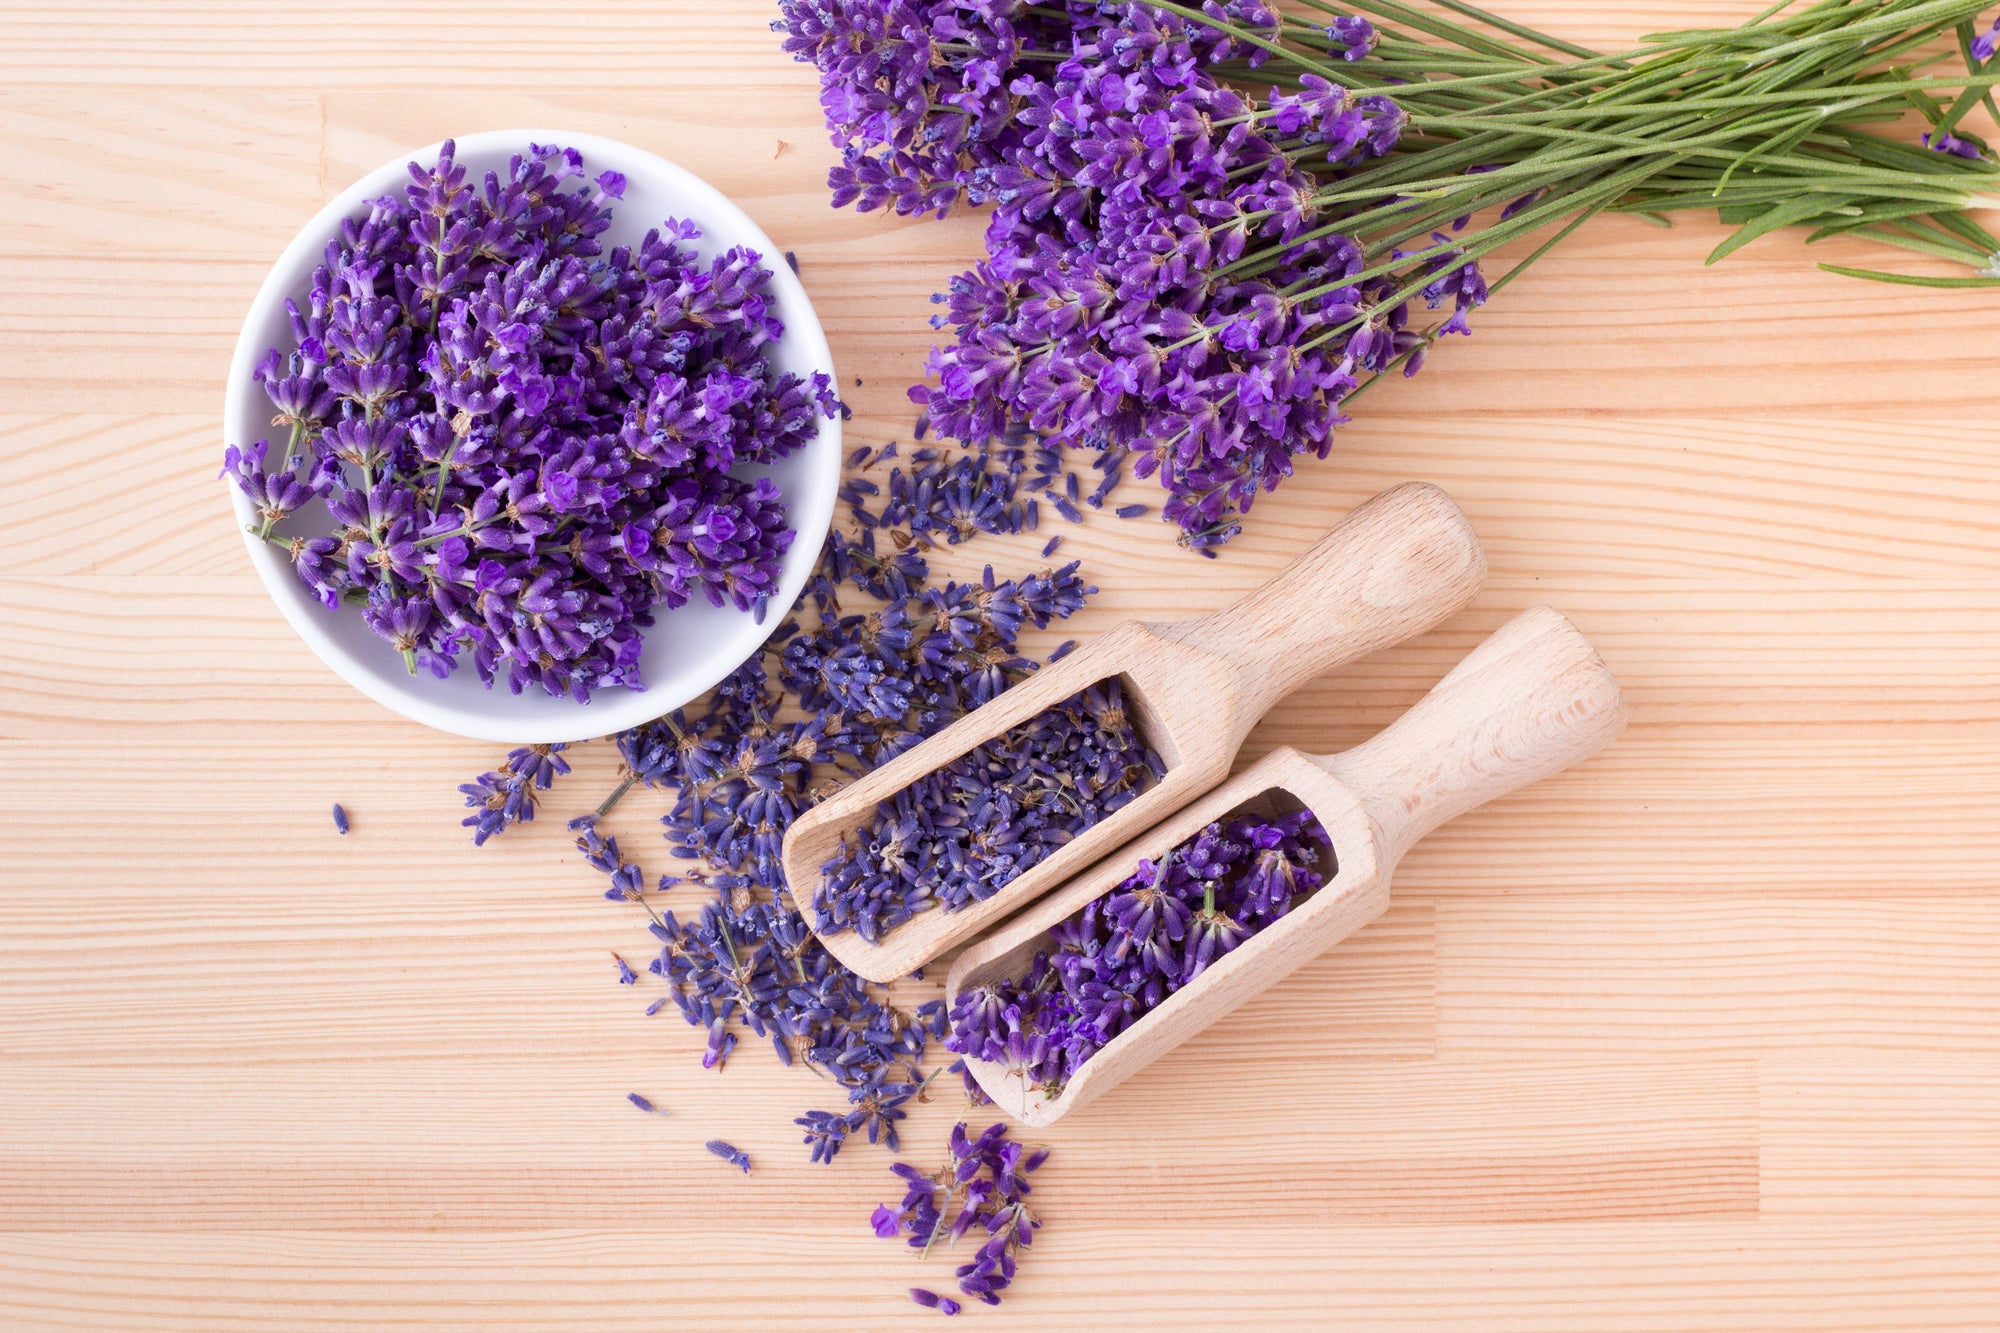 Highlighting the lovely scent of Lavender